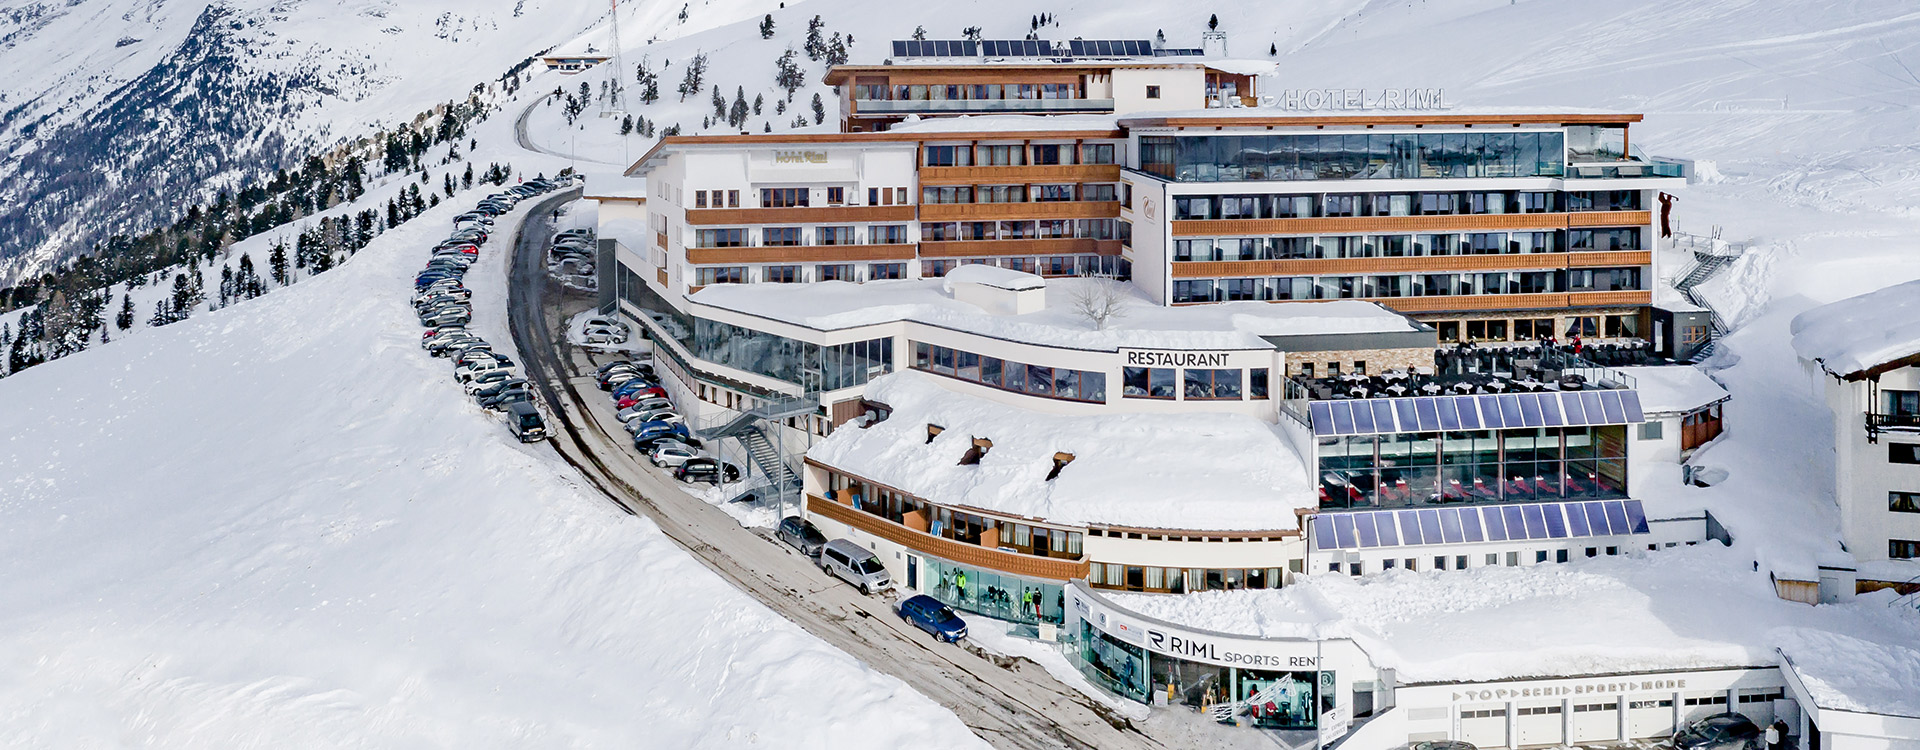 Adults Only Hotel an der Piste